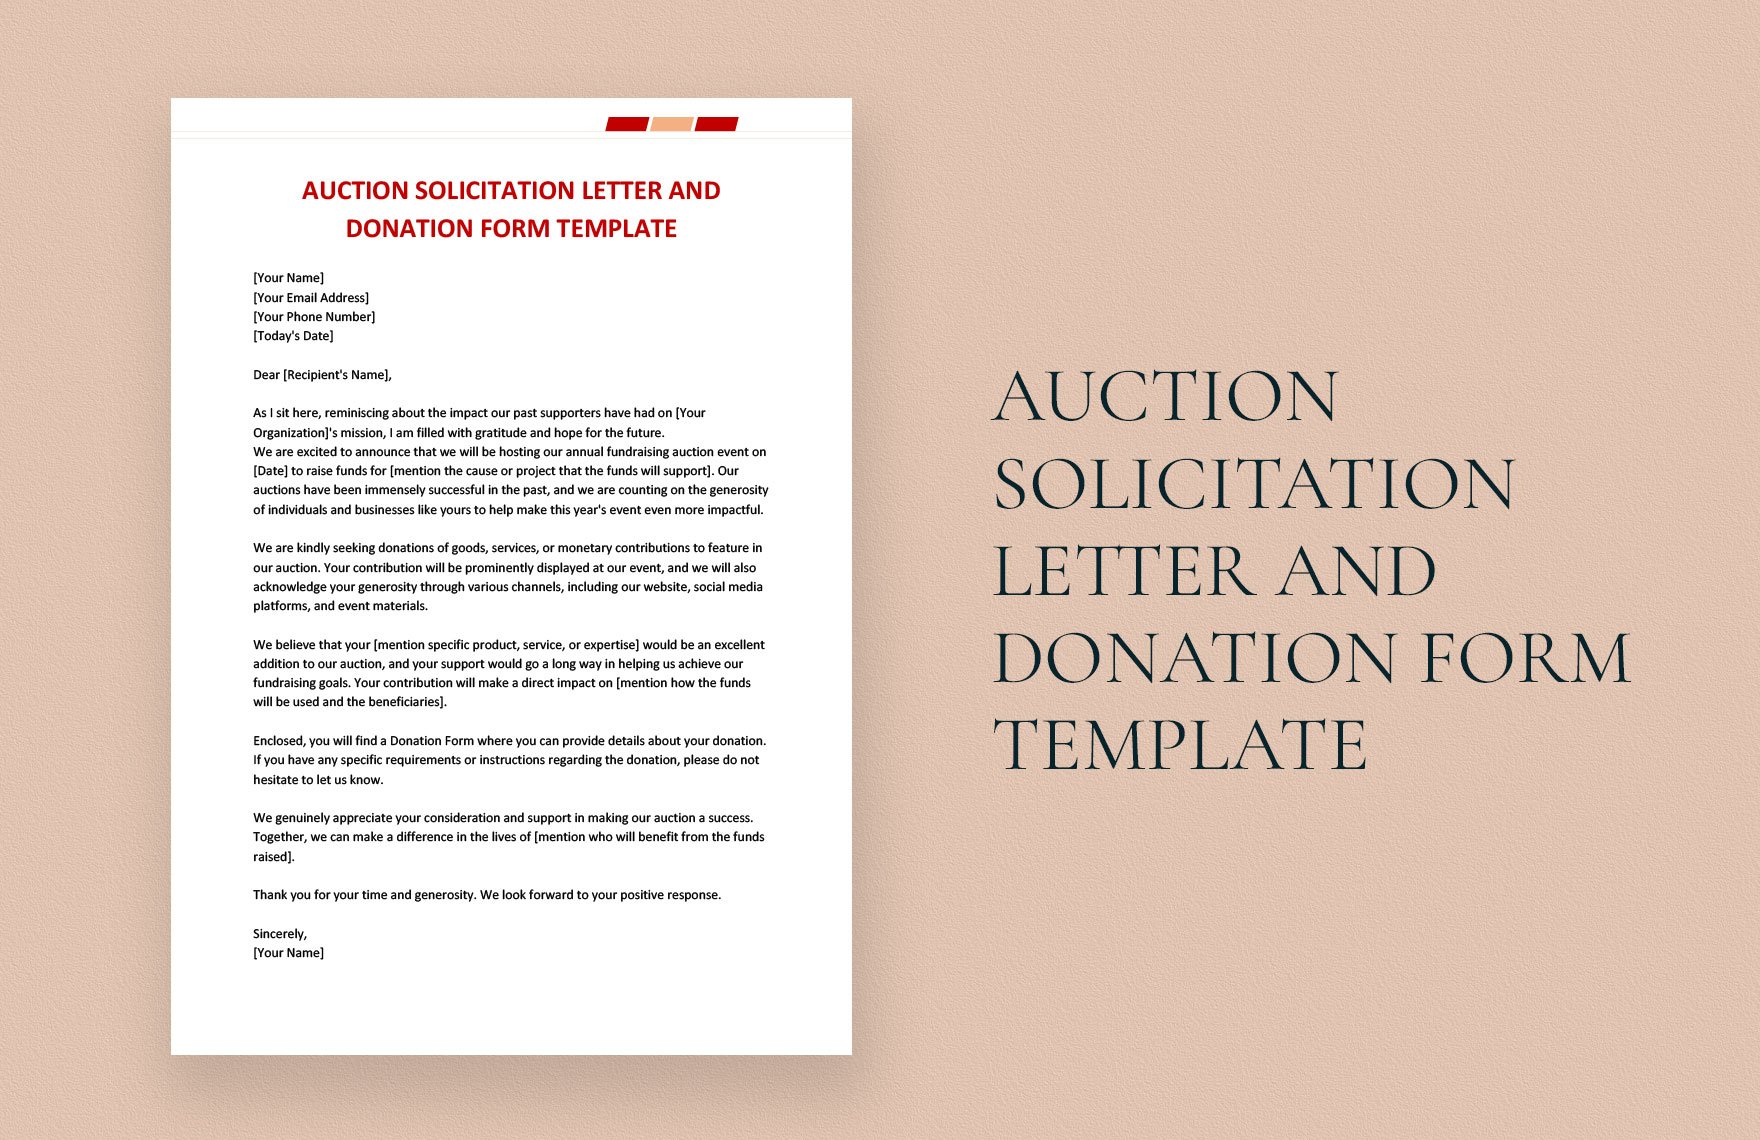 Auction Solicitation Letter and Donation Form Template in Word, Google Docs